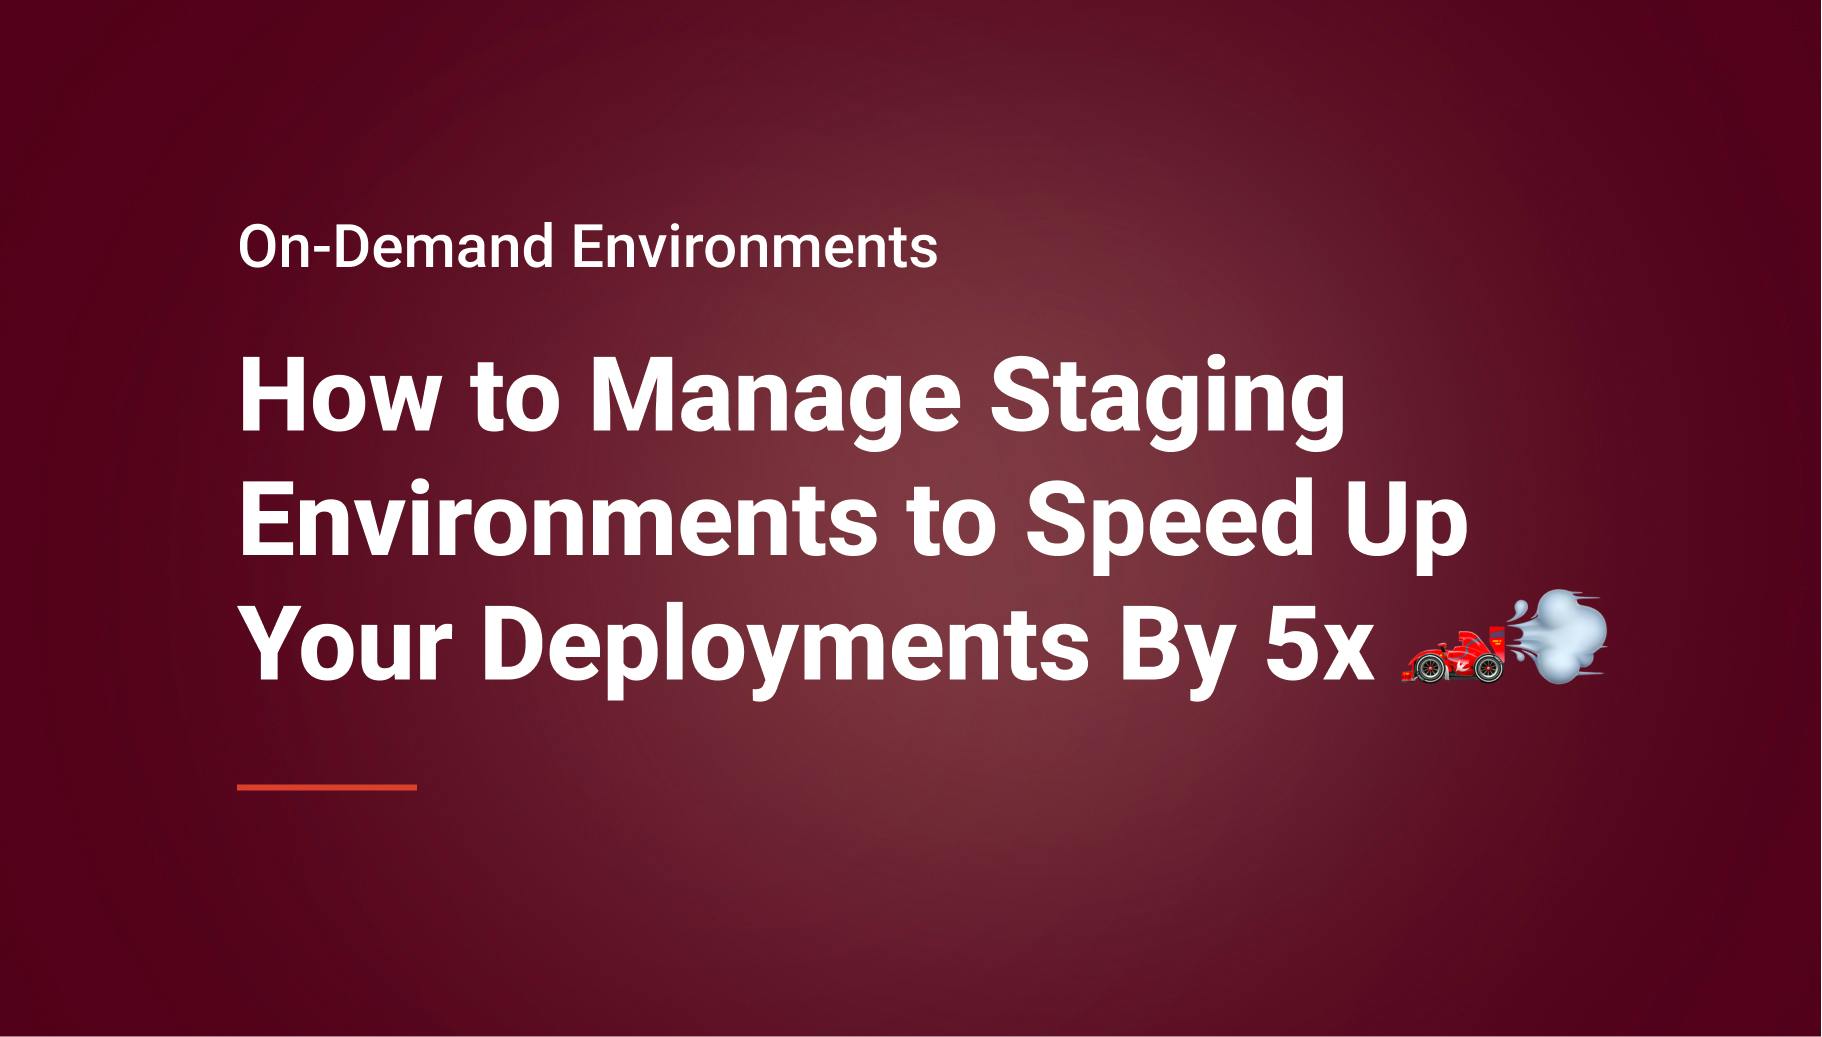 How to Manage Staging Environments to Speed Up Your Deployments By 5x - Qovery